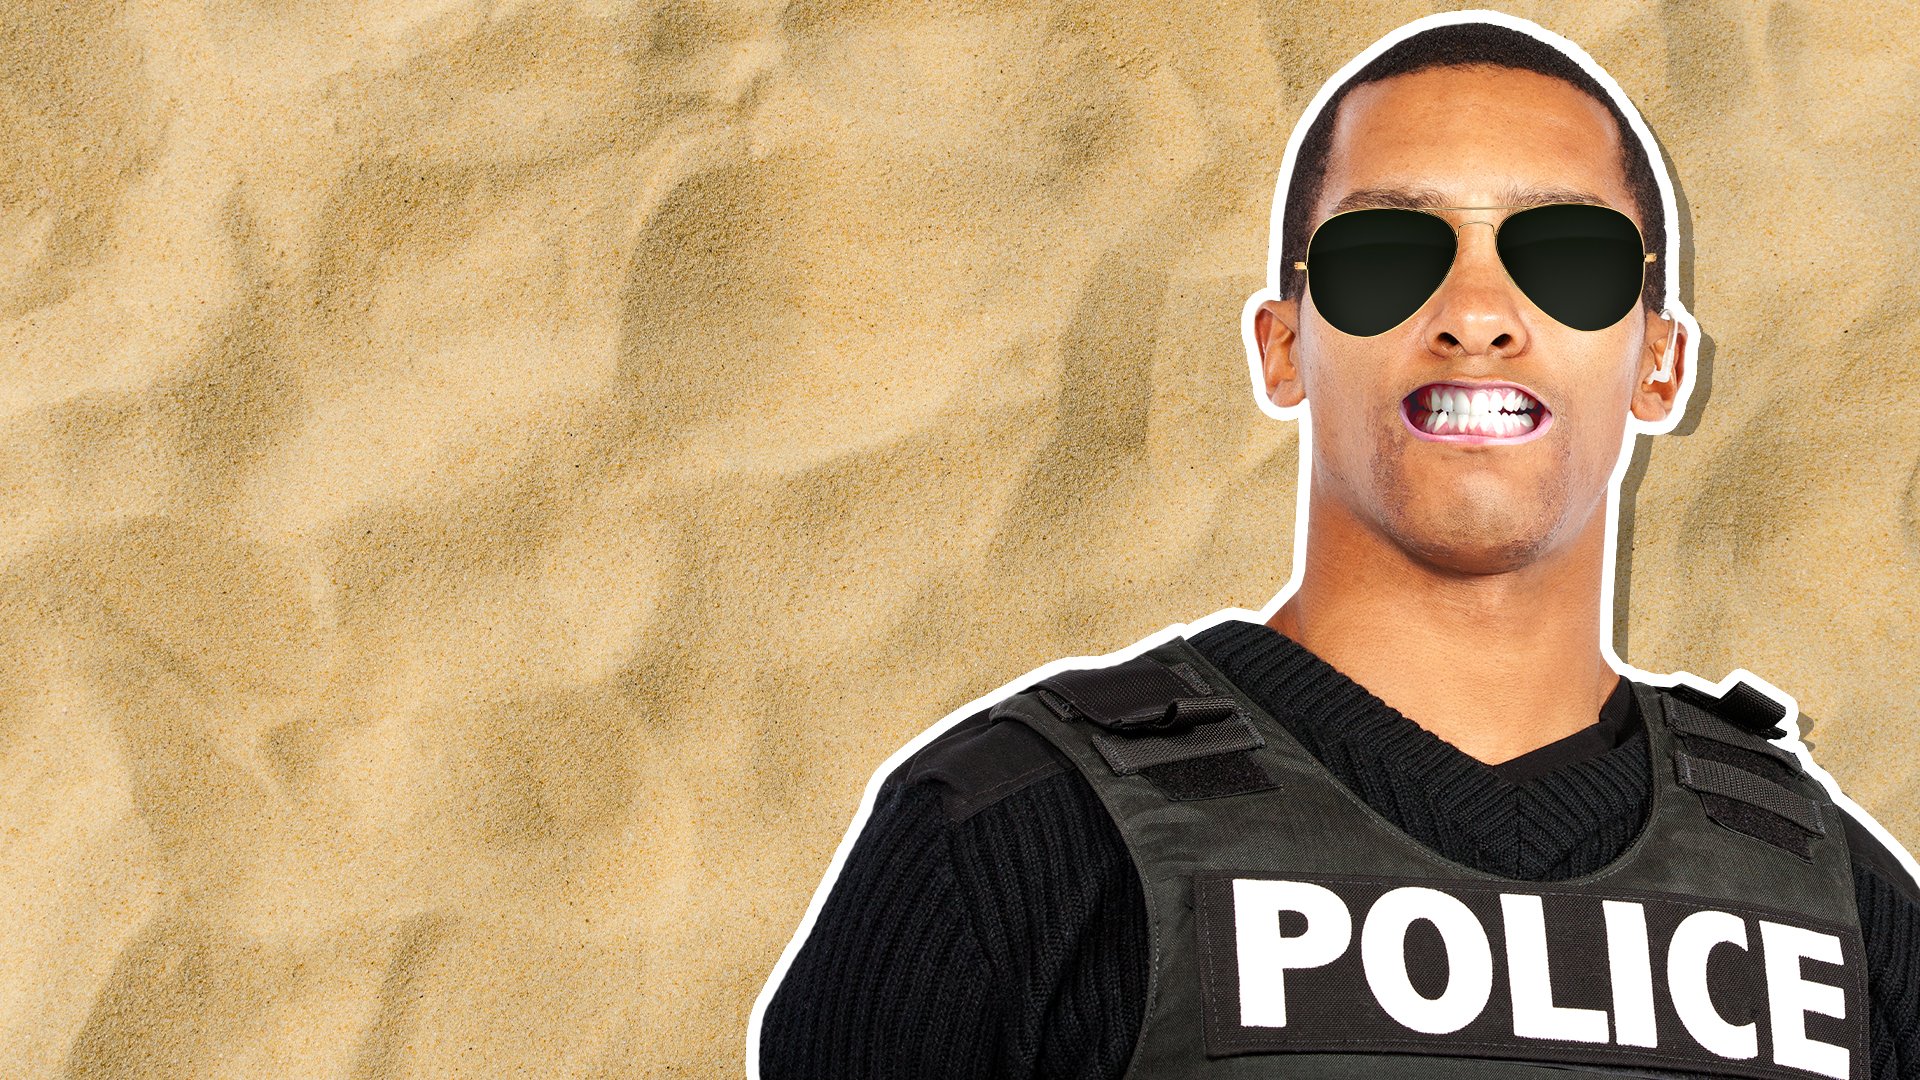 A police officer next to a sandy background